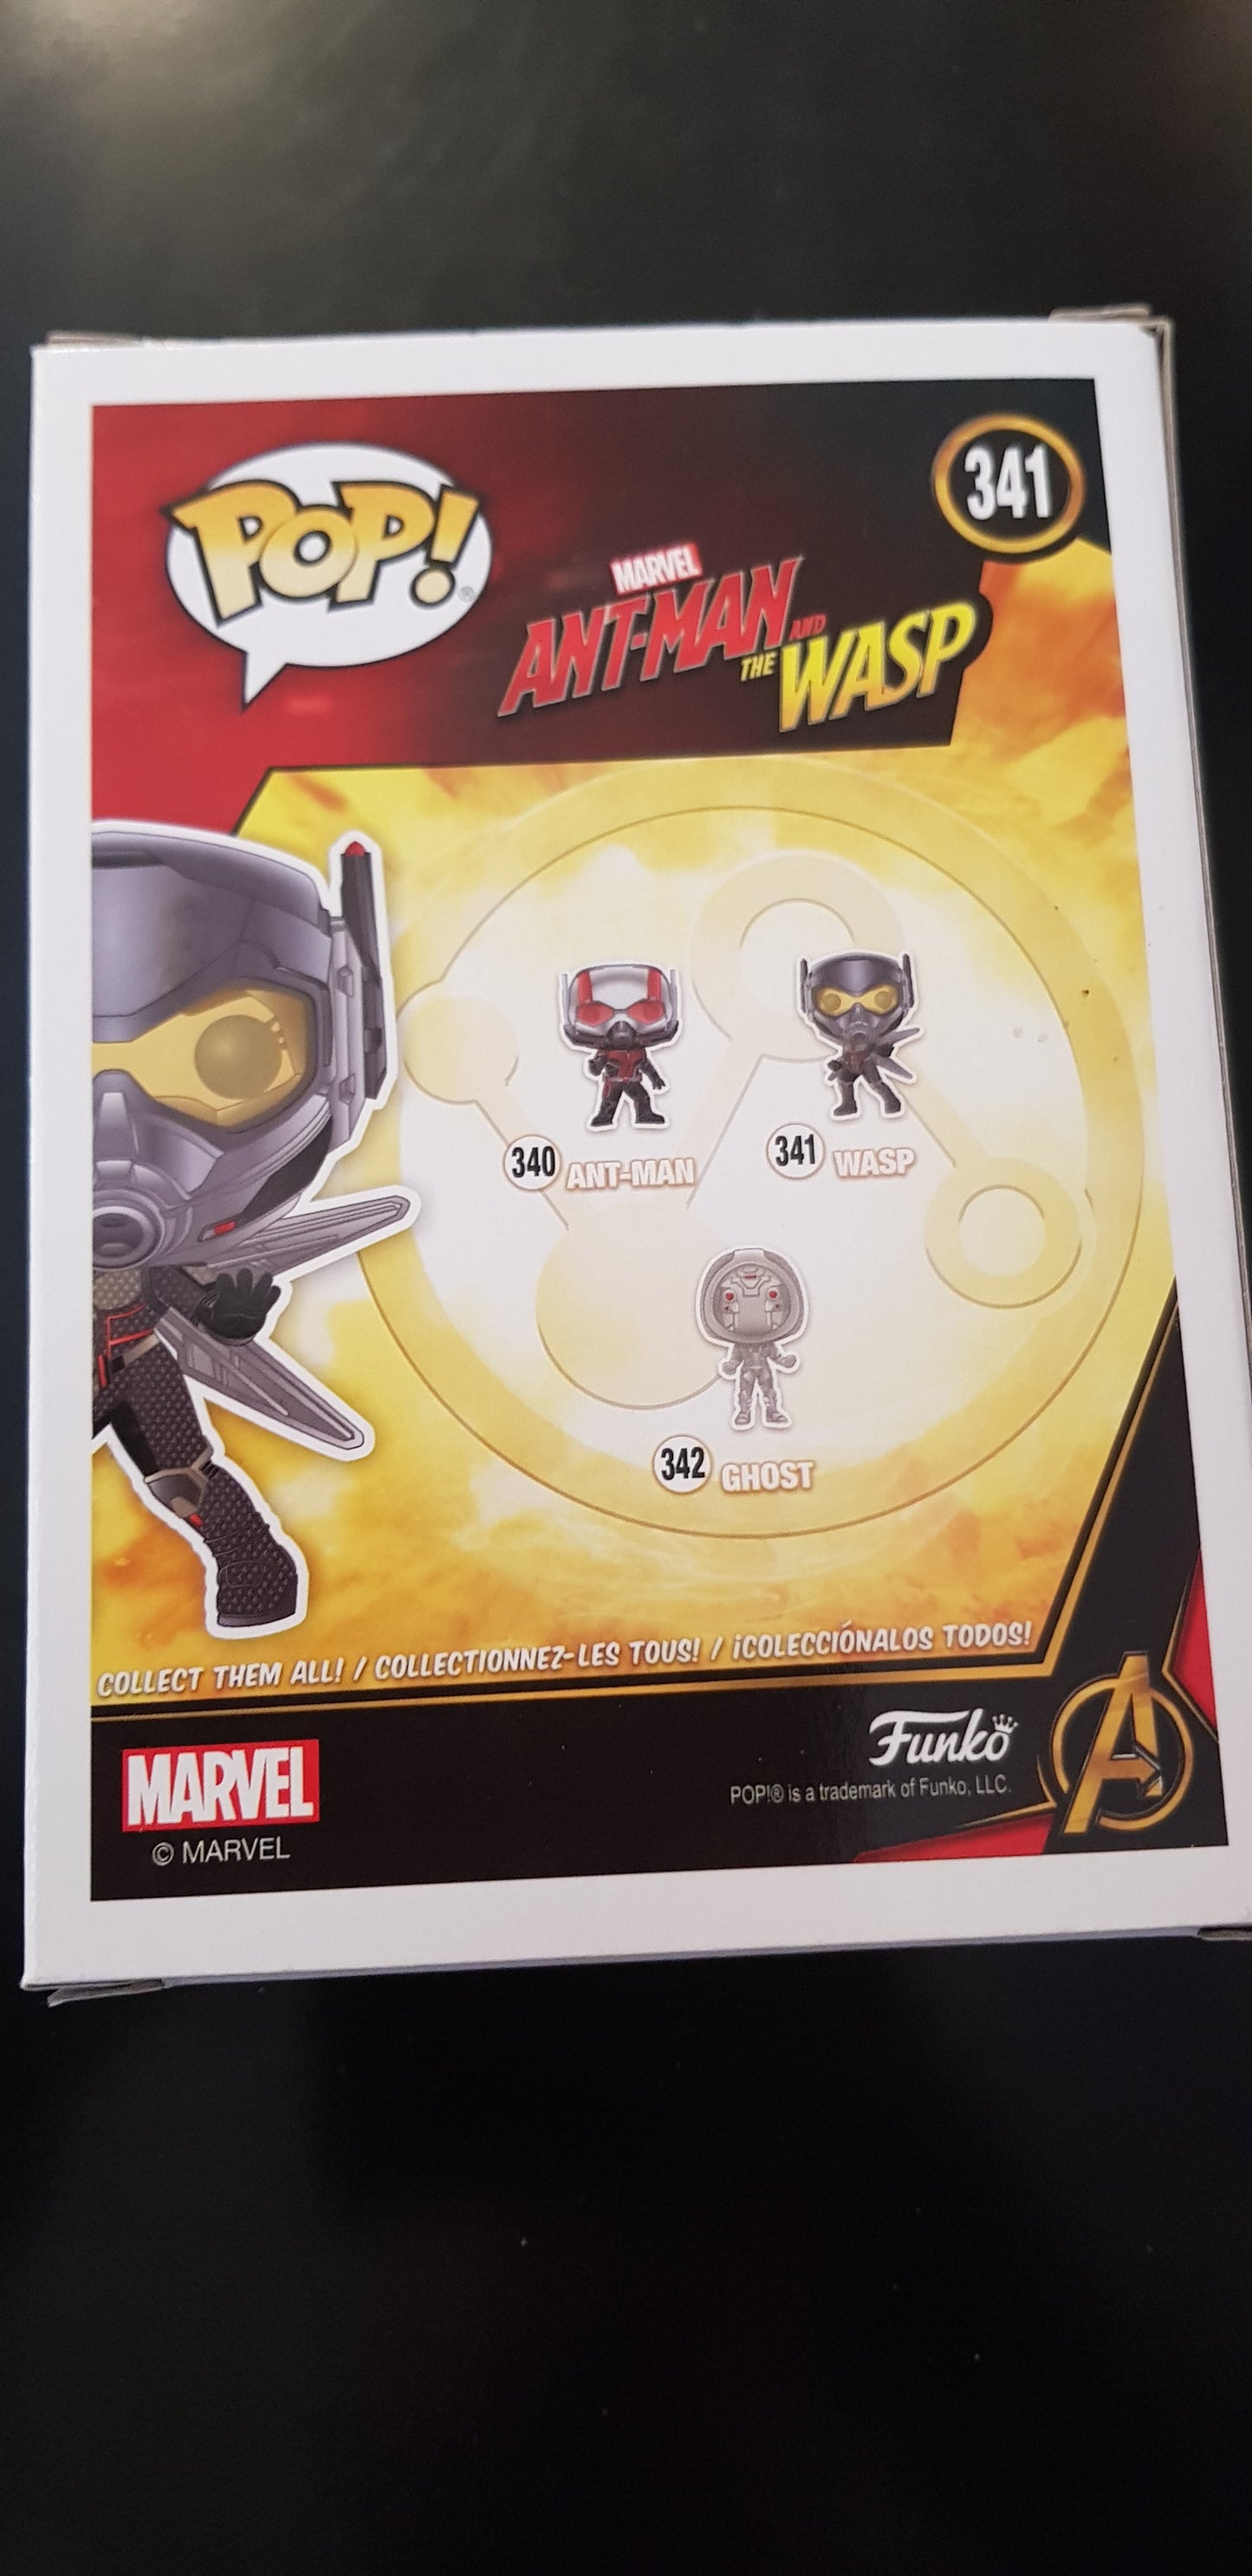 WASP-ANTMAN AND THE WASP-MARVEL-FUNKO-PRELOVED